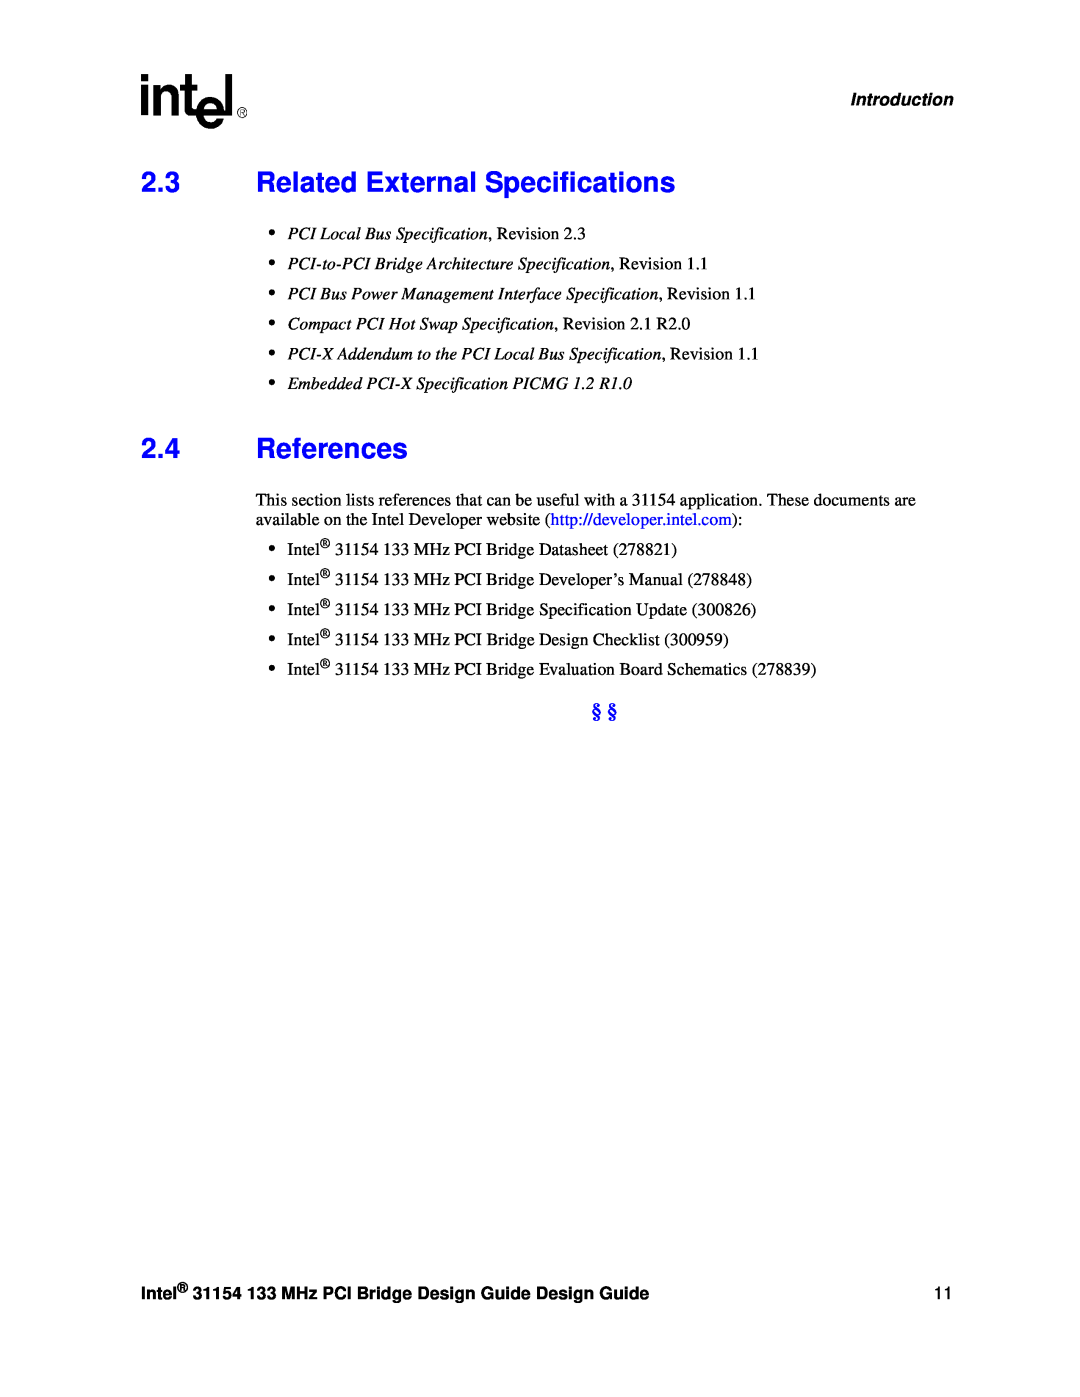 Intel 31154 manual Related External Specifications, References, PCI Local Bus Specification, Revision, Introduction 